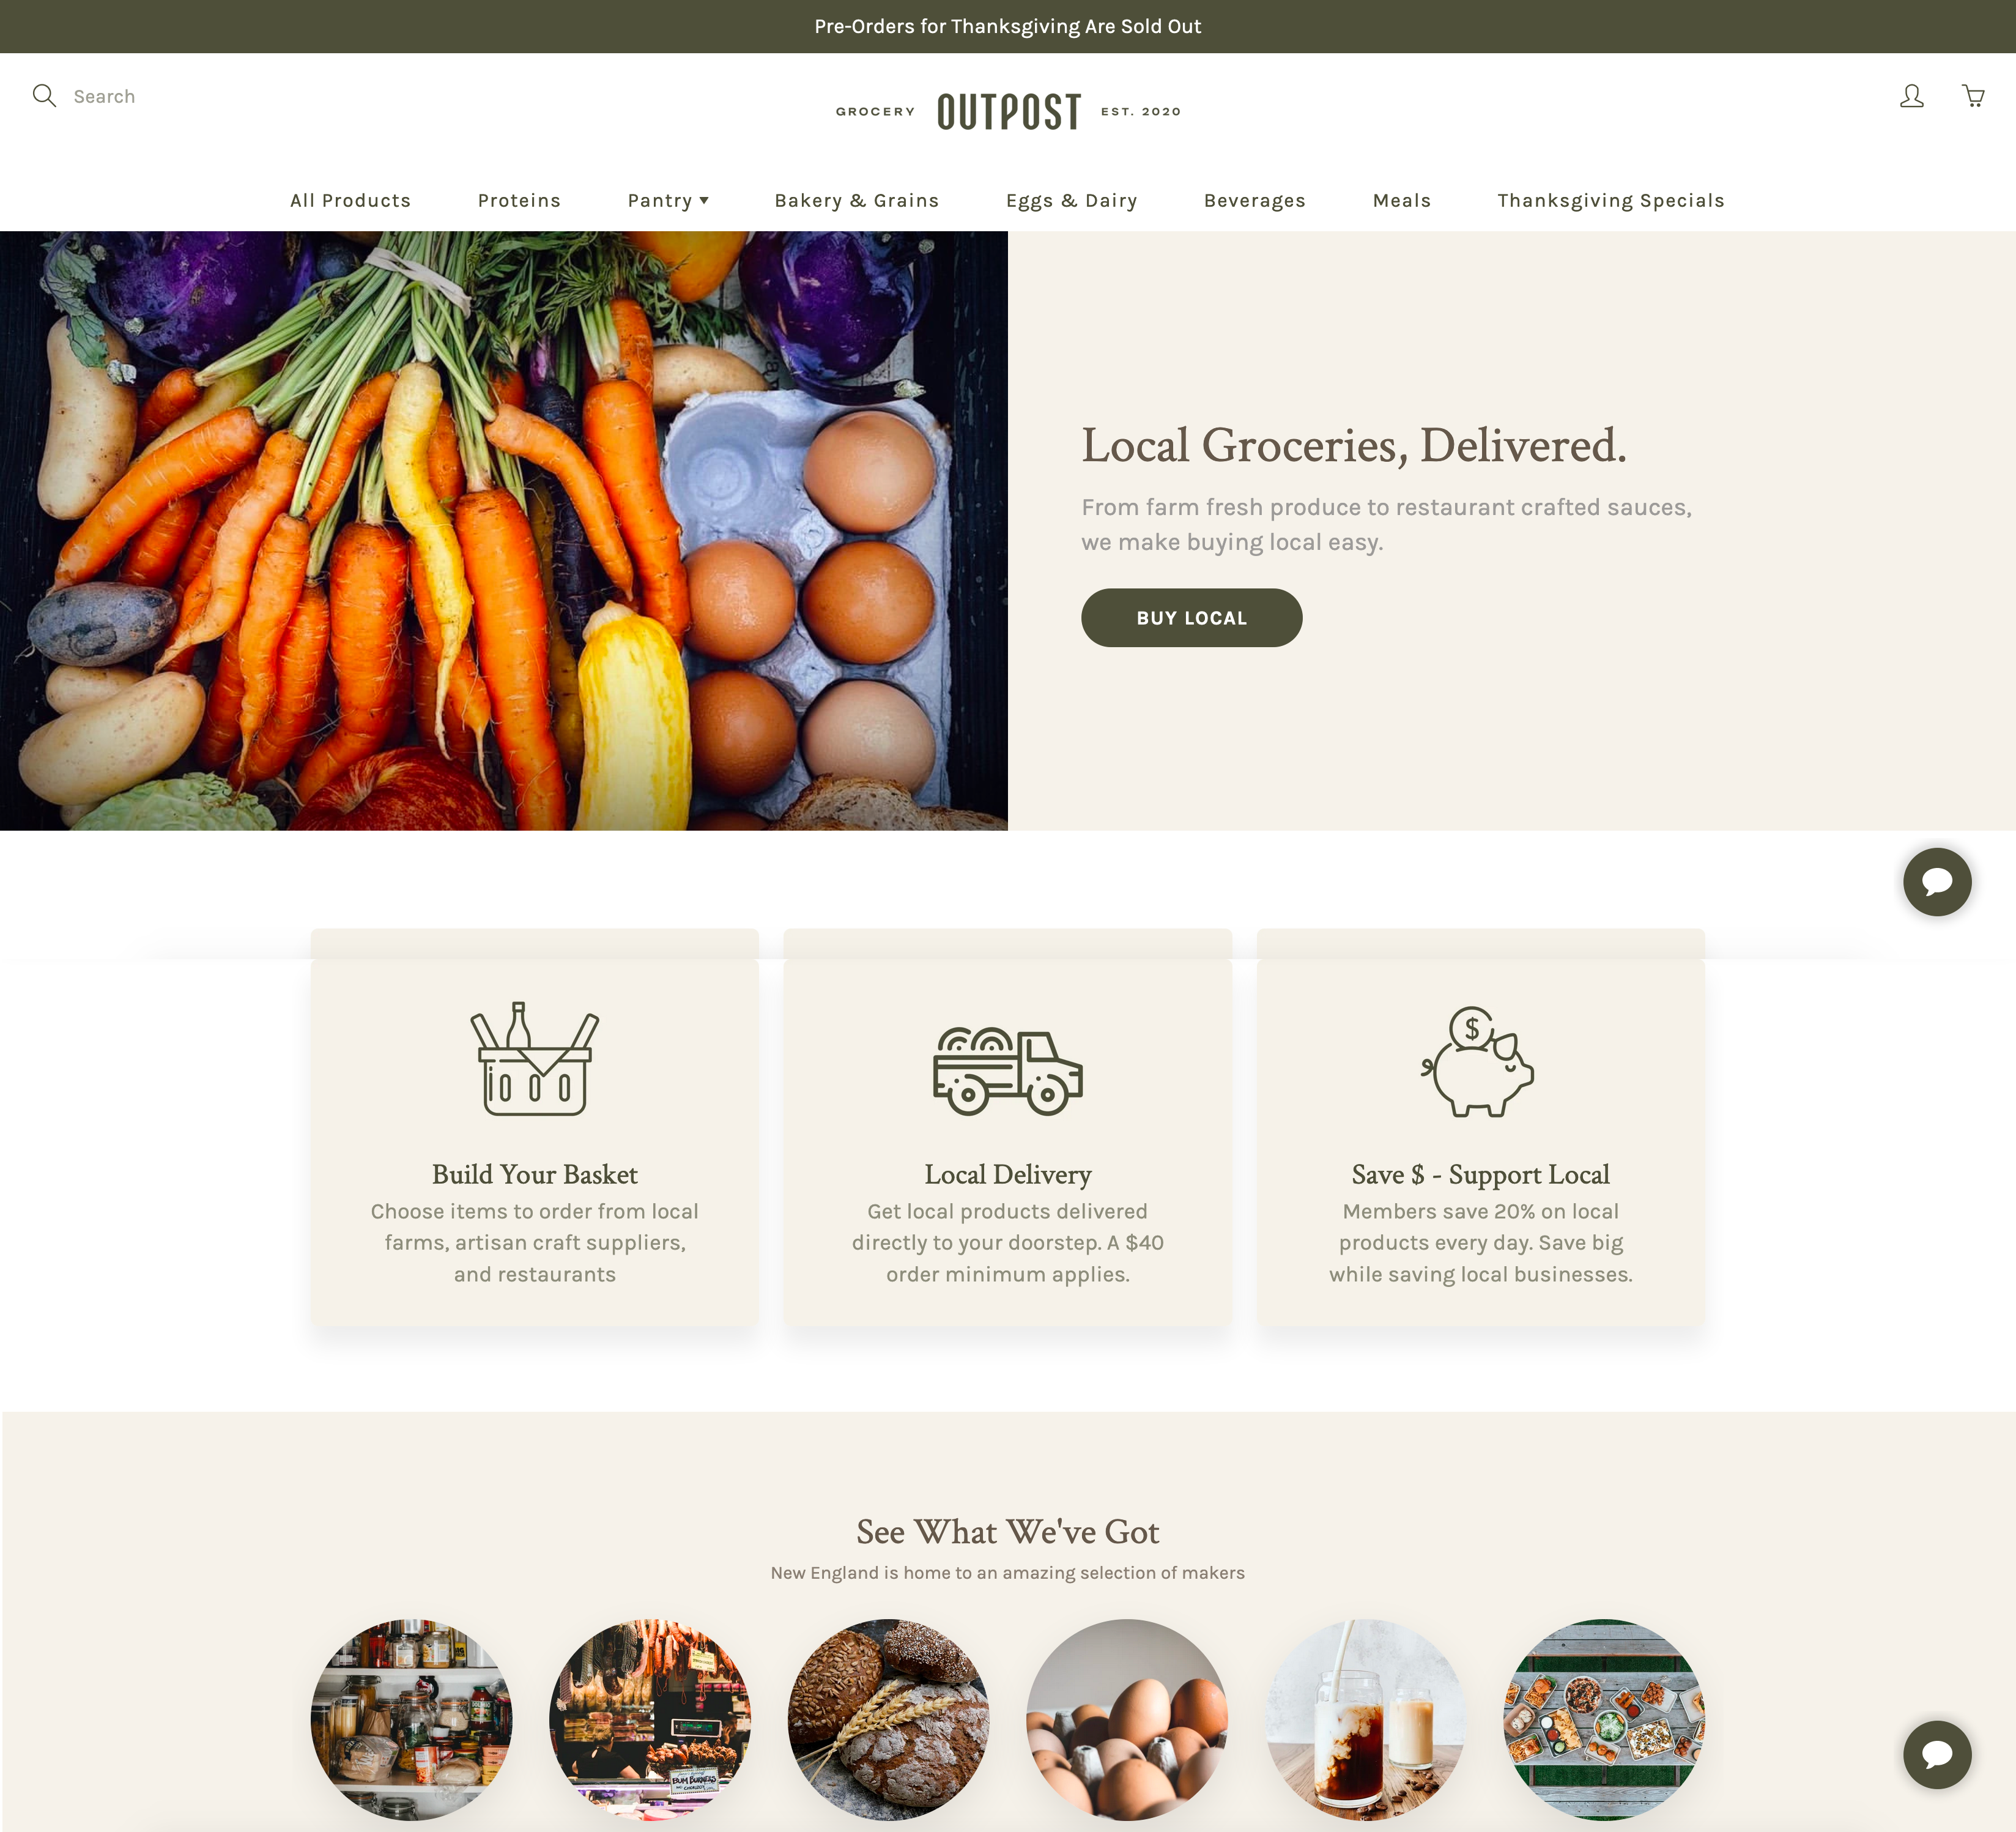 Screenshot of the Grocery Outpost website showing the navigation and hero image